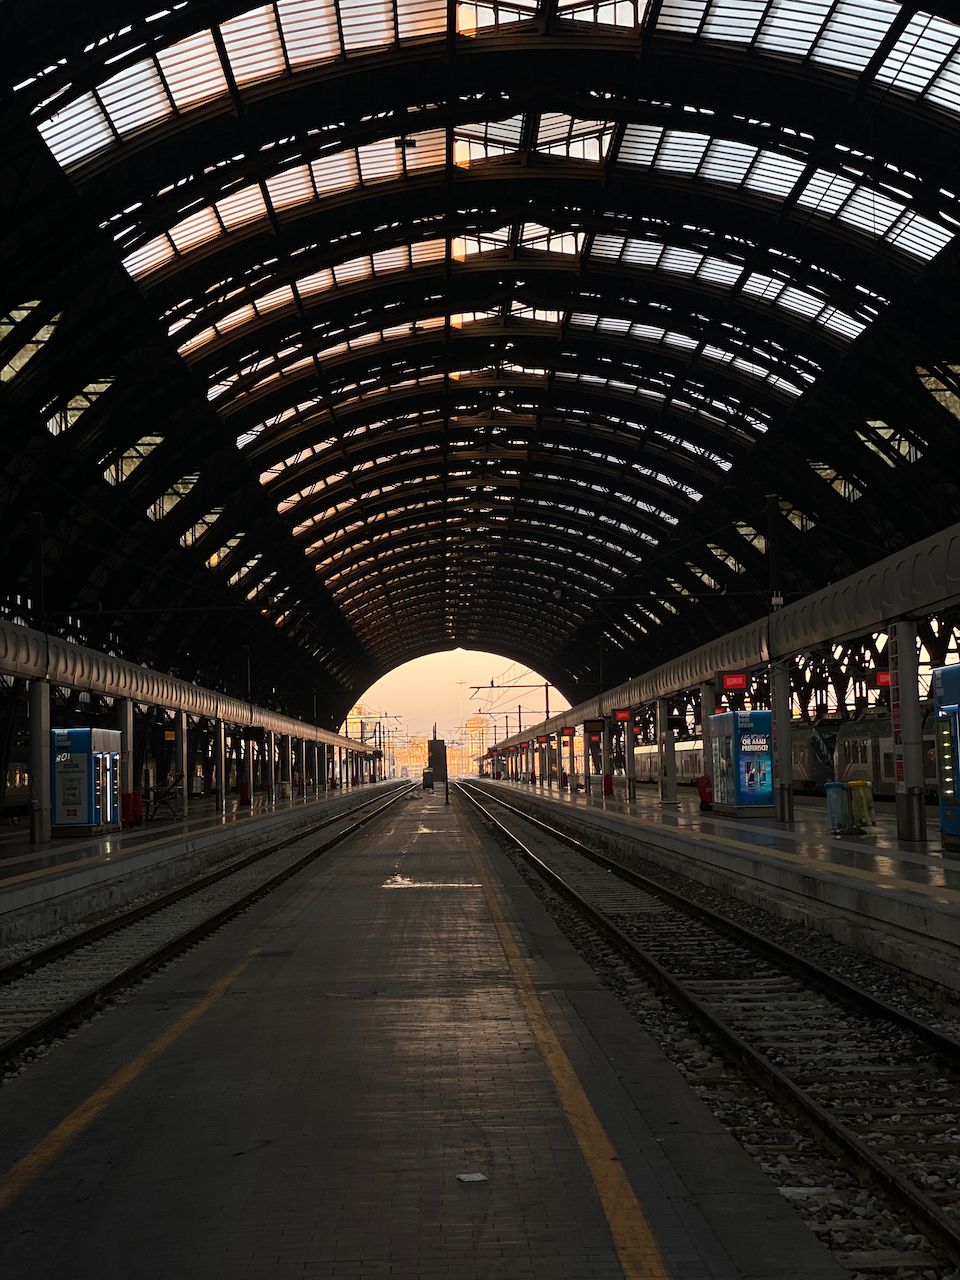 Milano Centrale at sunset